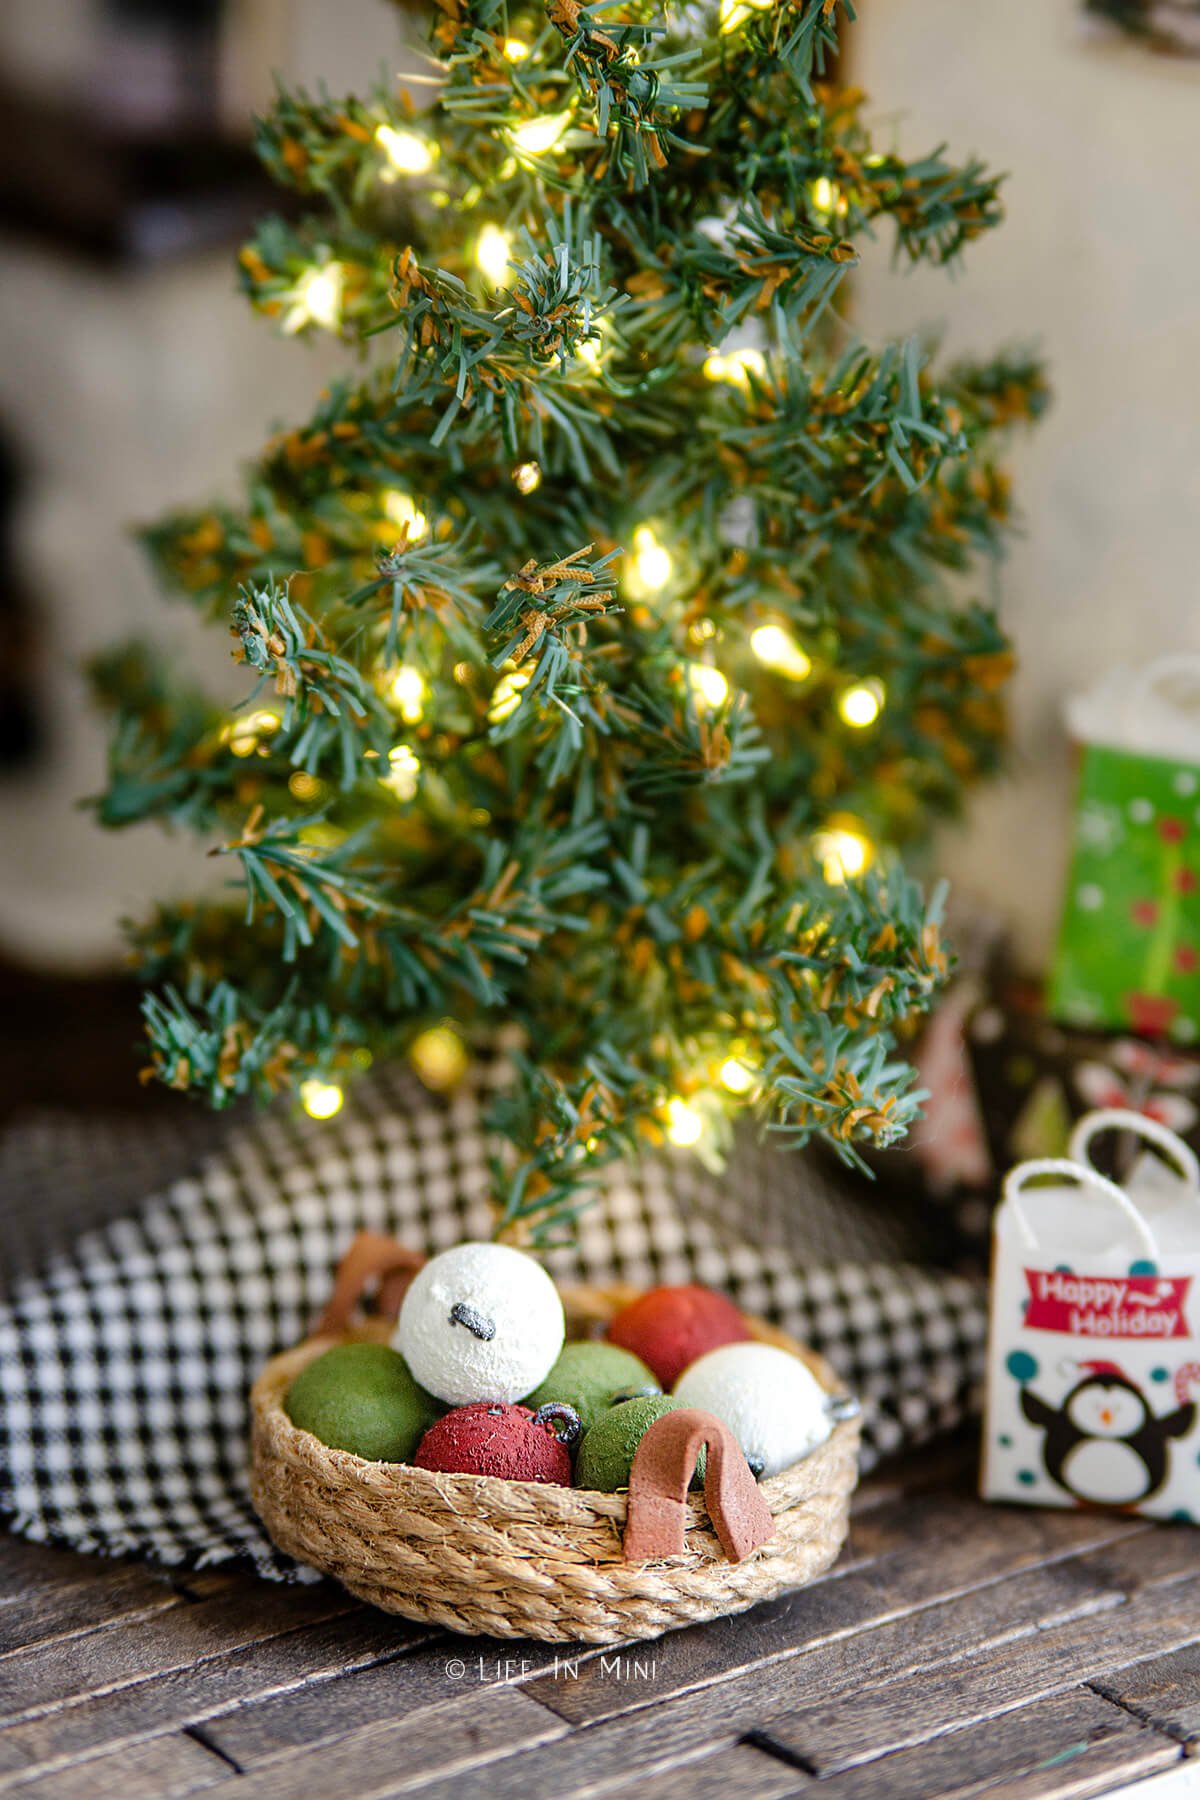 A dollhouse Christmas tree lit up with a basket of homemade chalk painted ornament balls in them